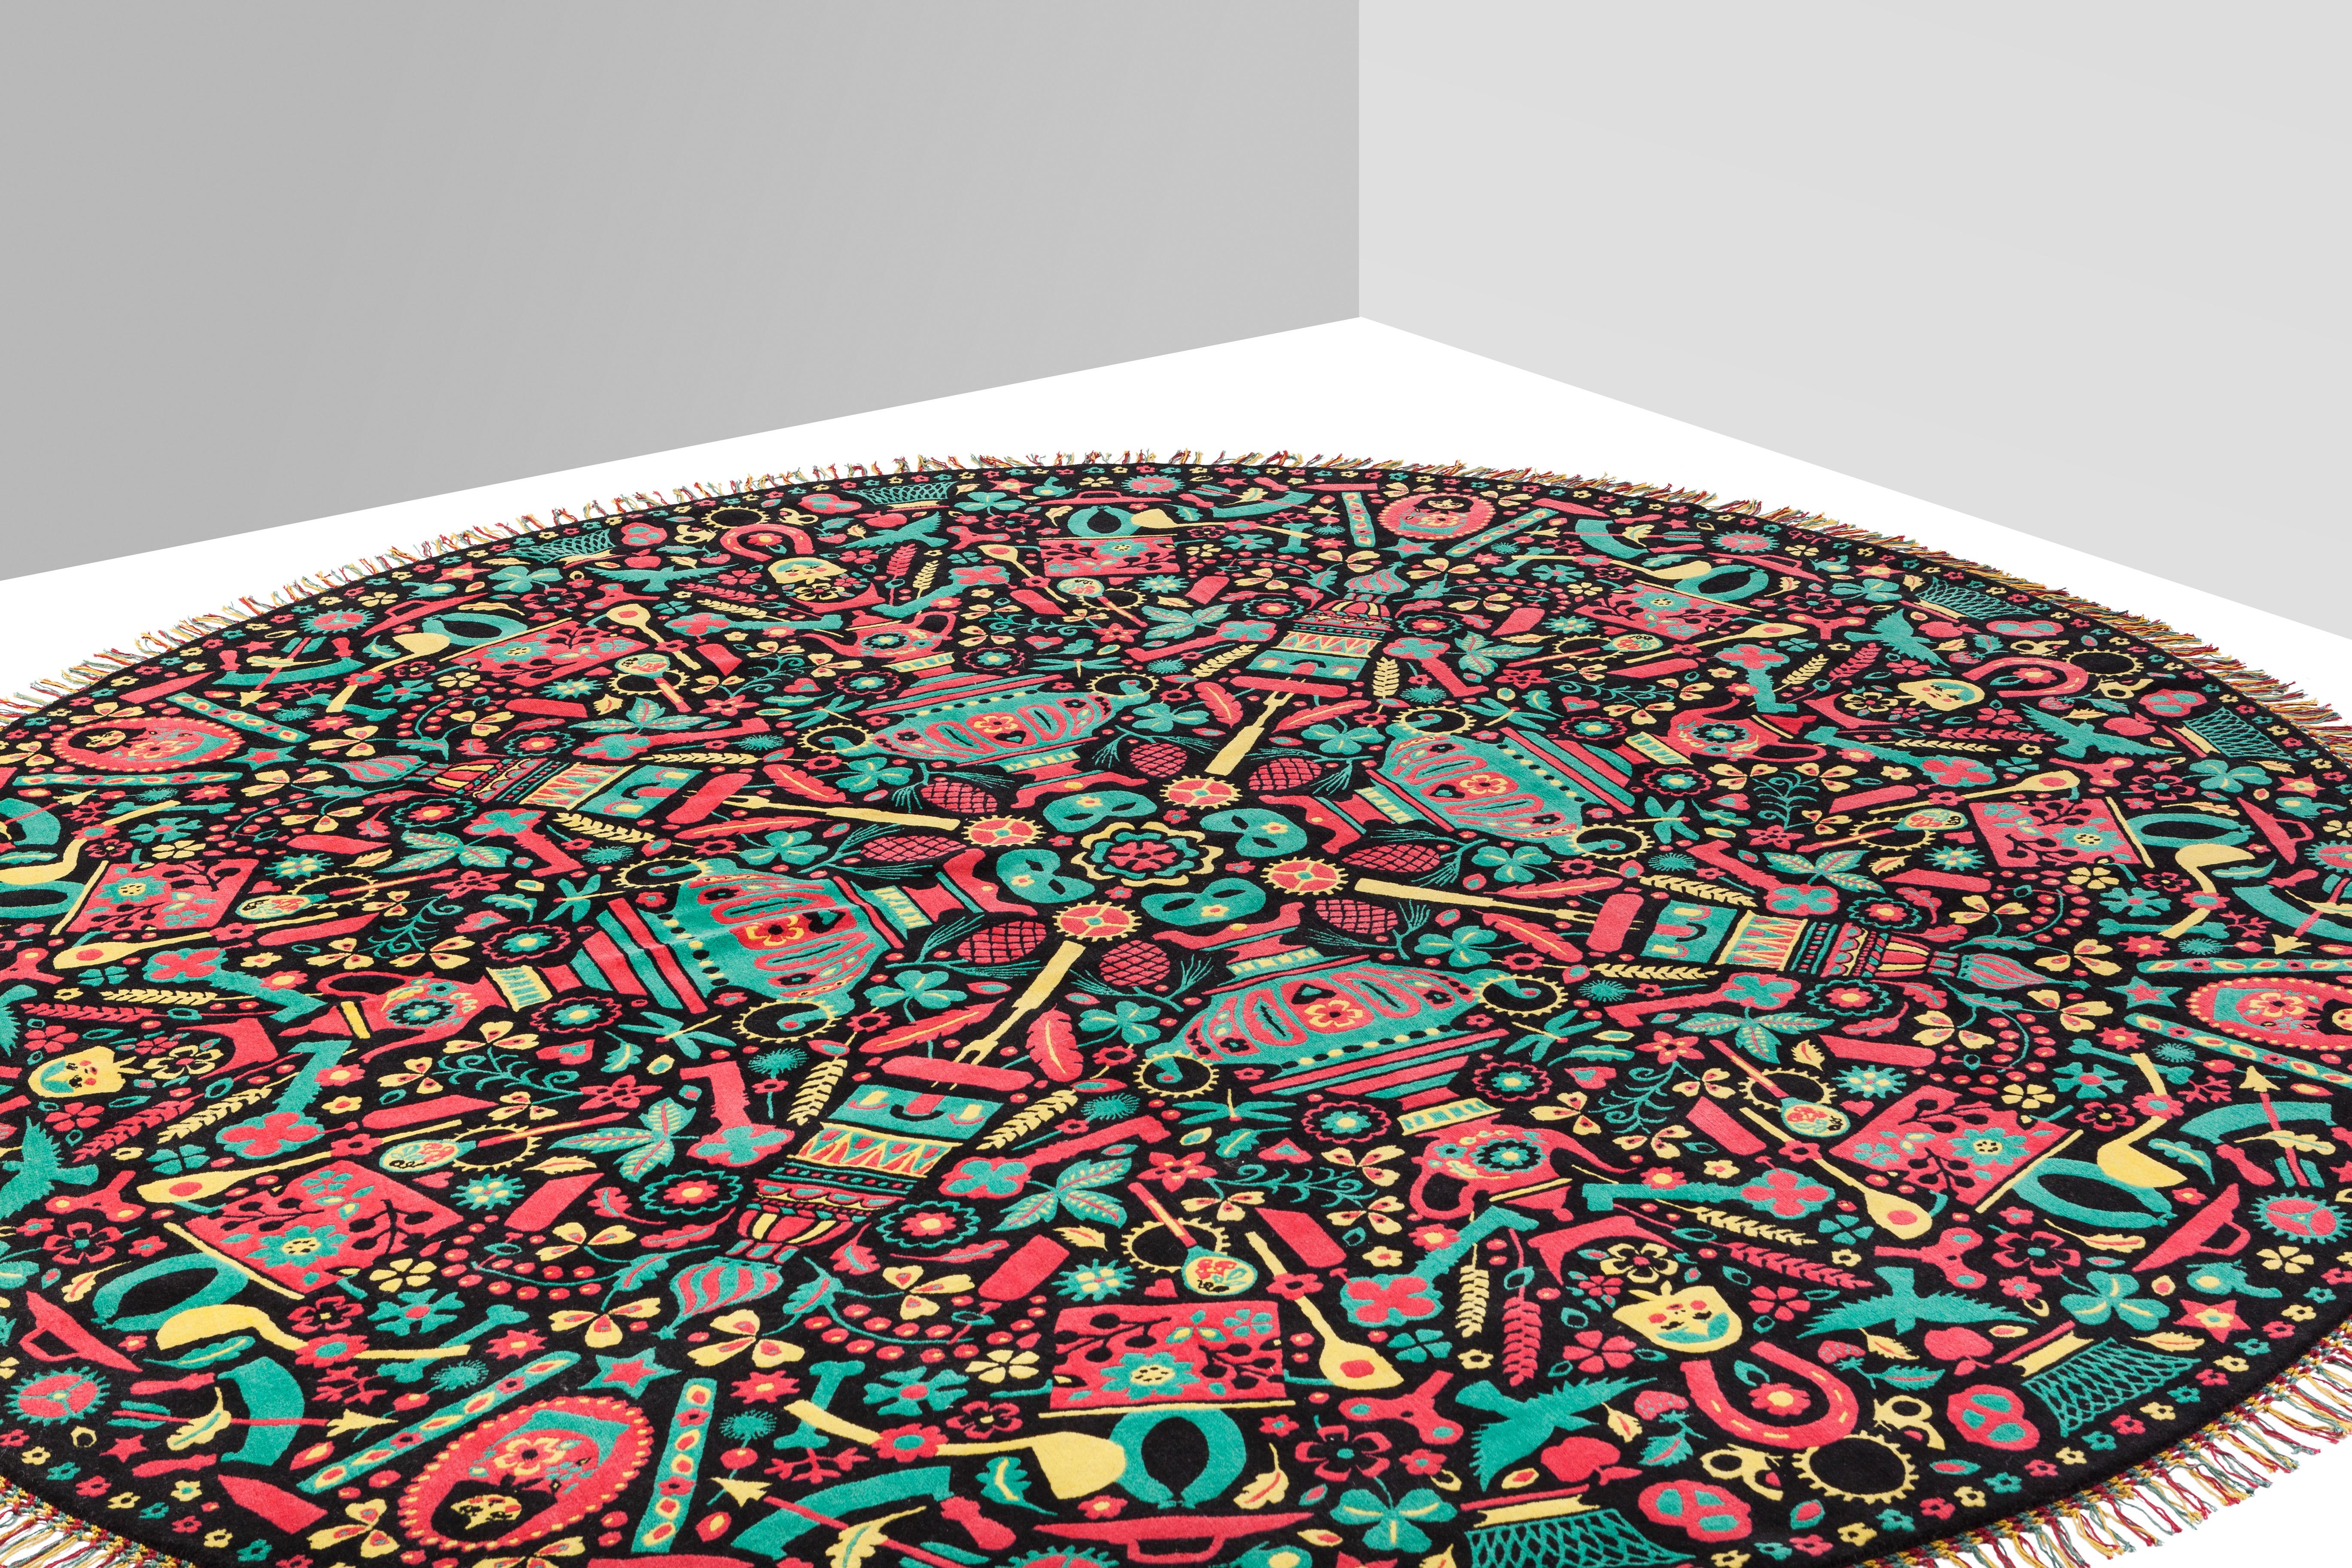 From 2013 collection, Studio Job celebrated the Russian culture with a carpet full of classical Russian ornaments.
Russia is hand knotted carpet in wool, 200 knots/inch², diameter Ø 300cm, pile height 5mm

Russia is a limited edition carpet of